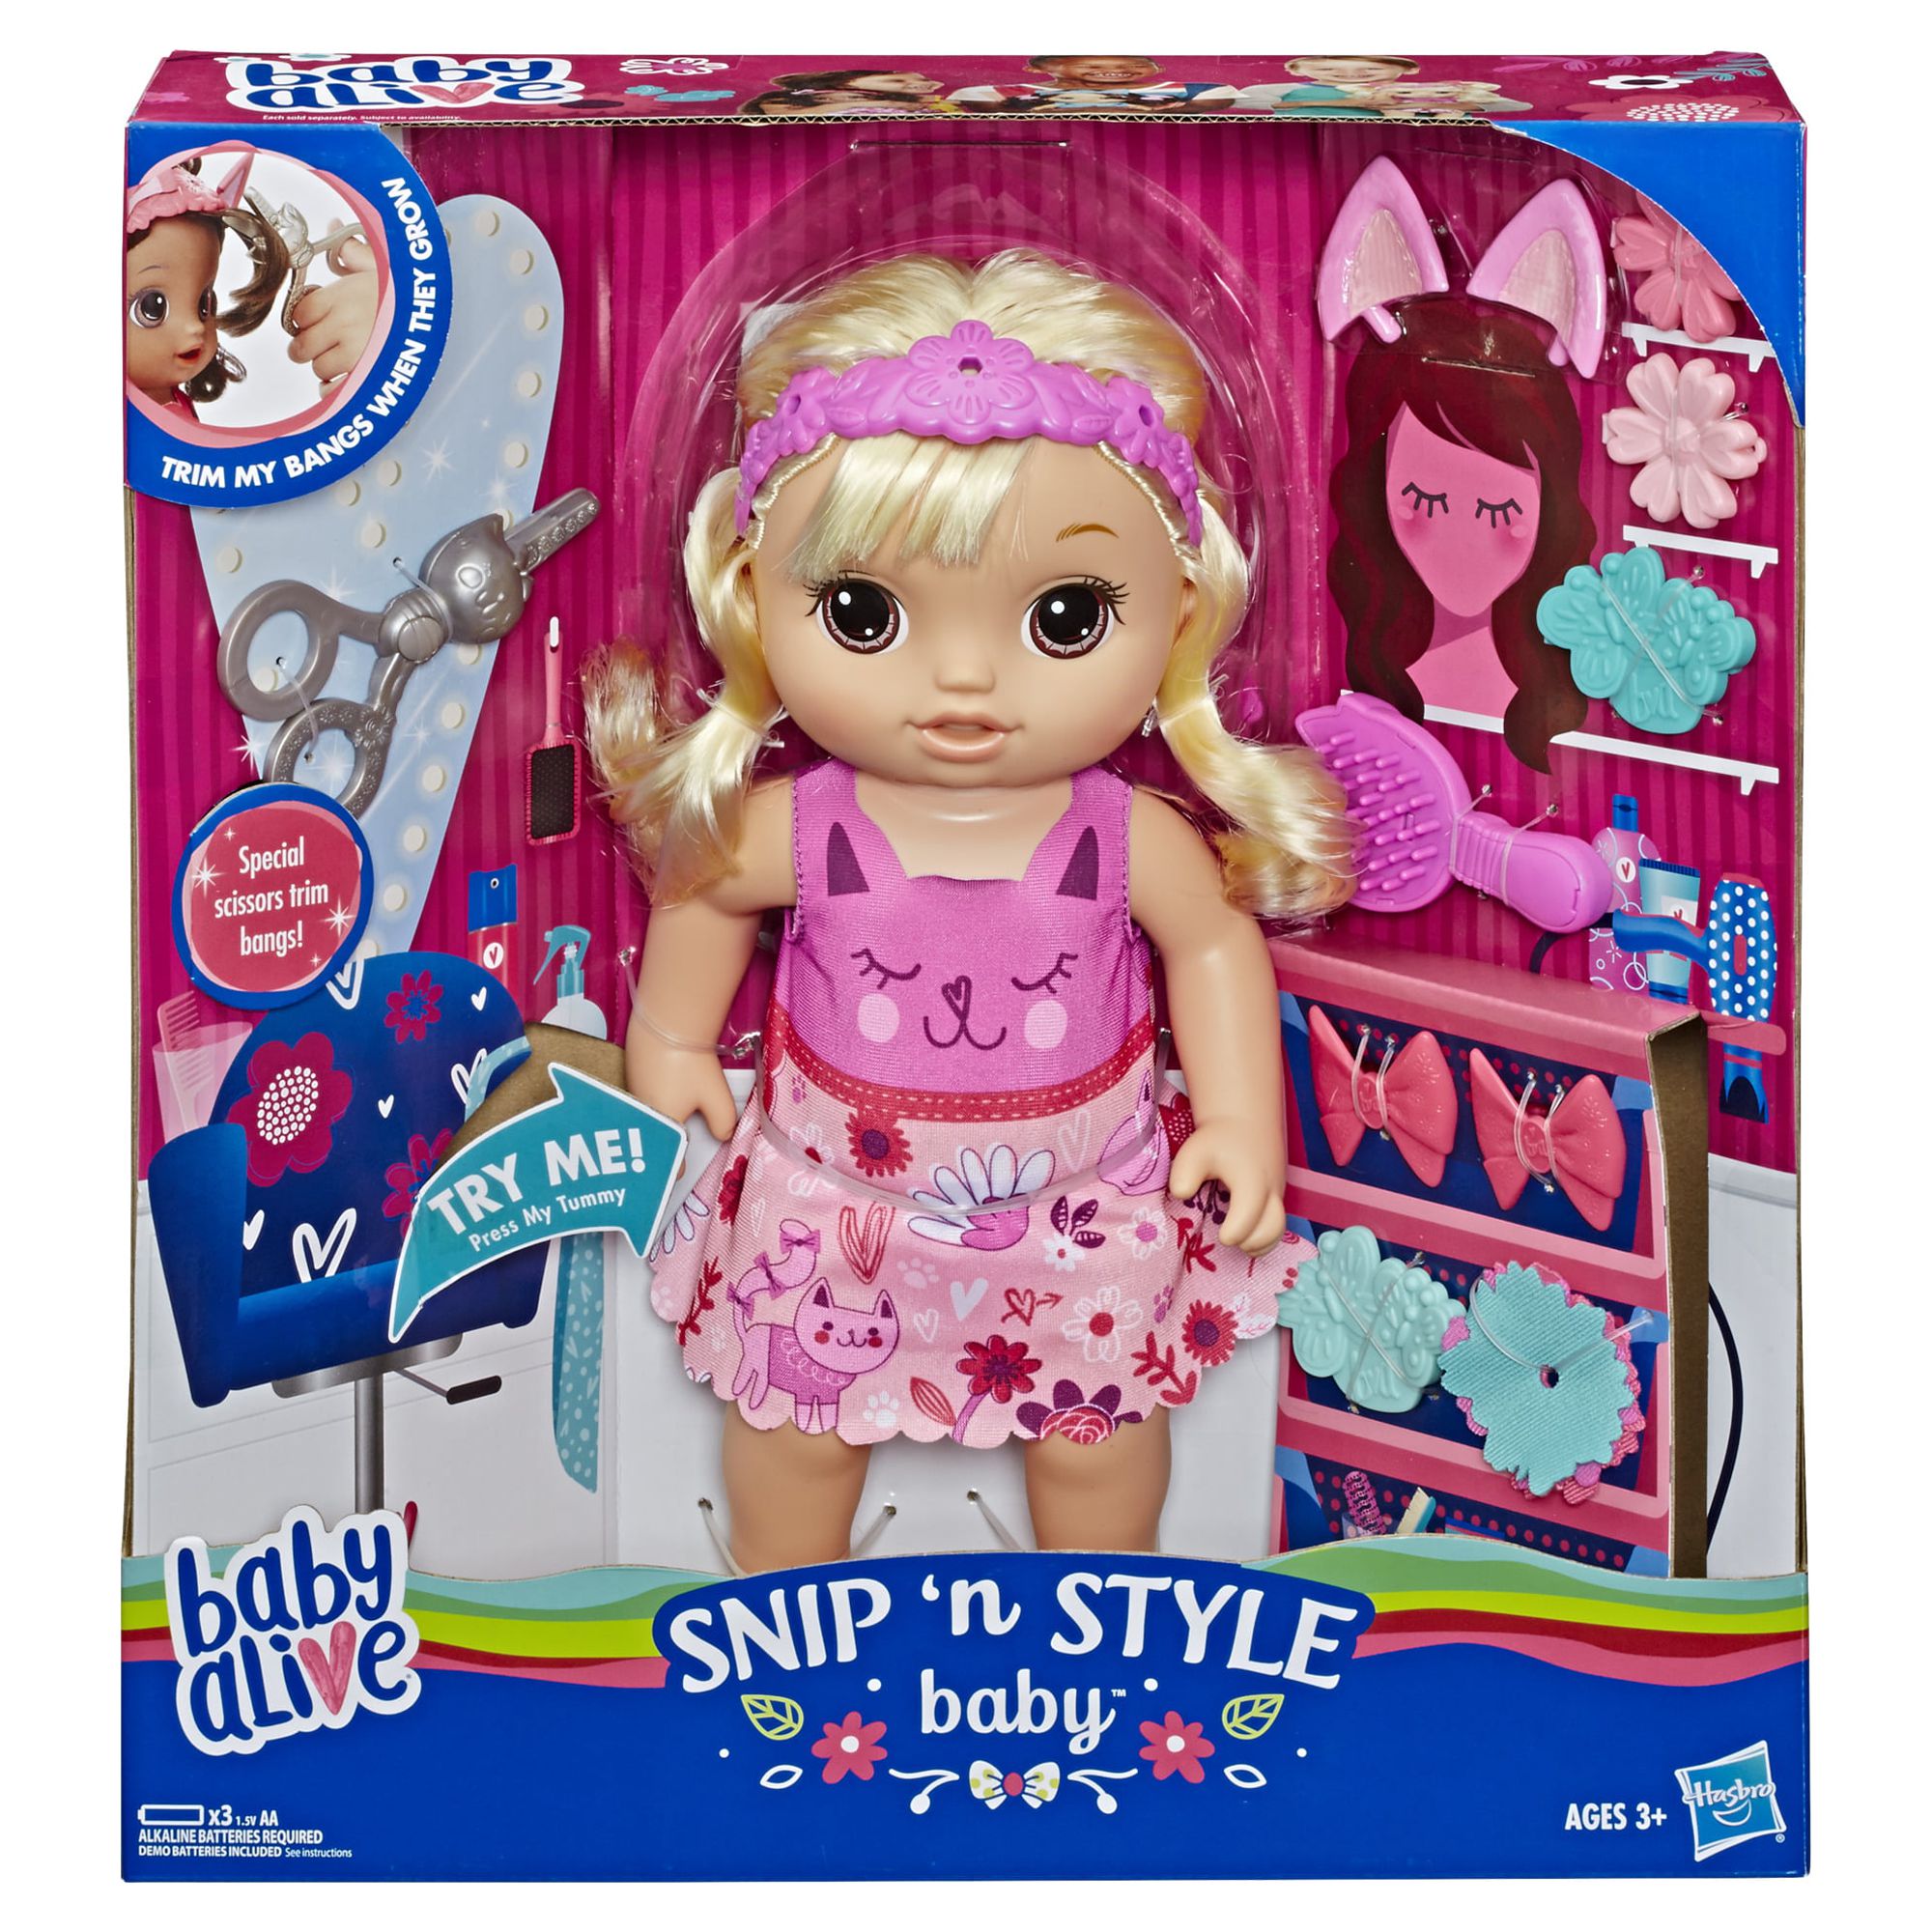 Baby Alive: Snip 'n Style Baby 15-Inch Doll Blonde Hair, Brown Eyes Kids Toy for Boys and Girls - image 3 of 13